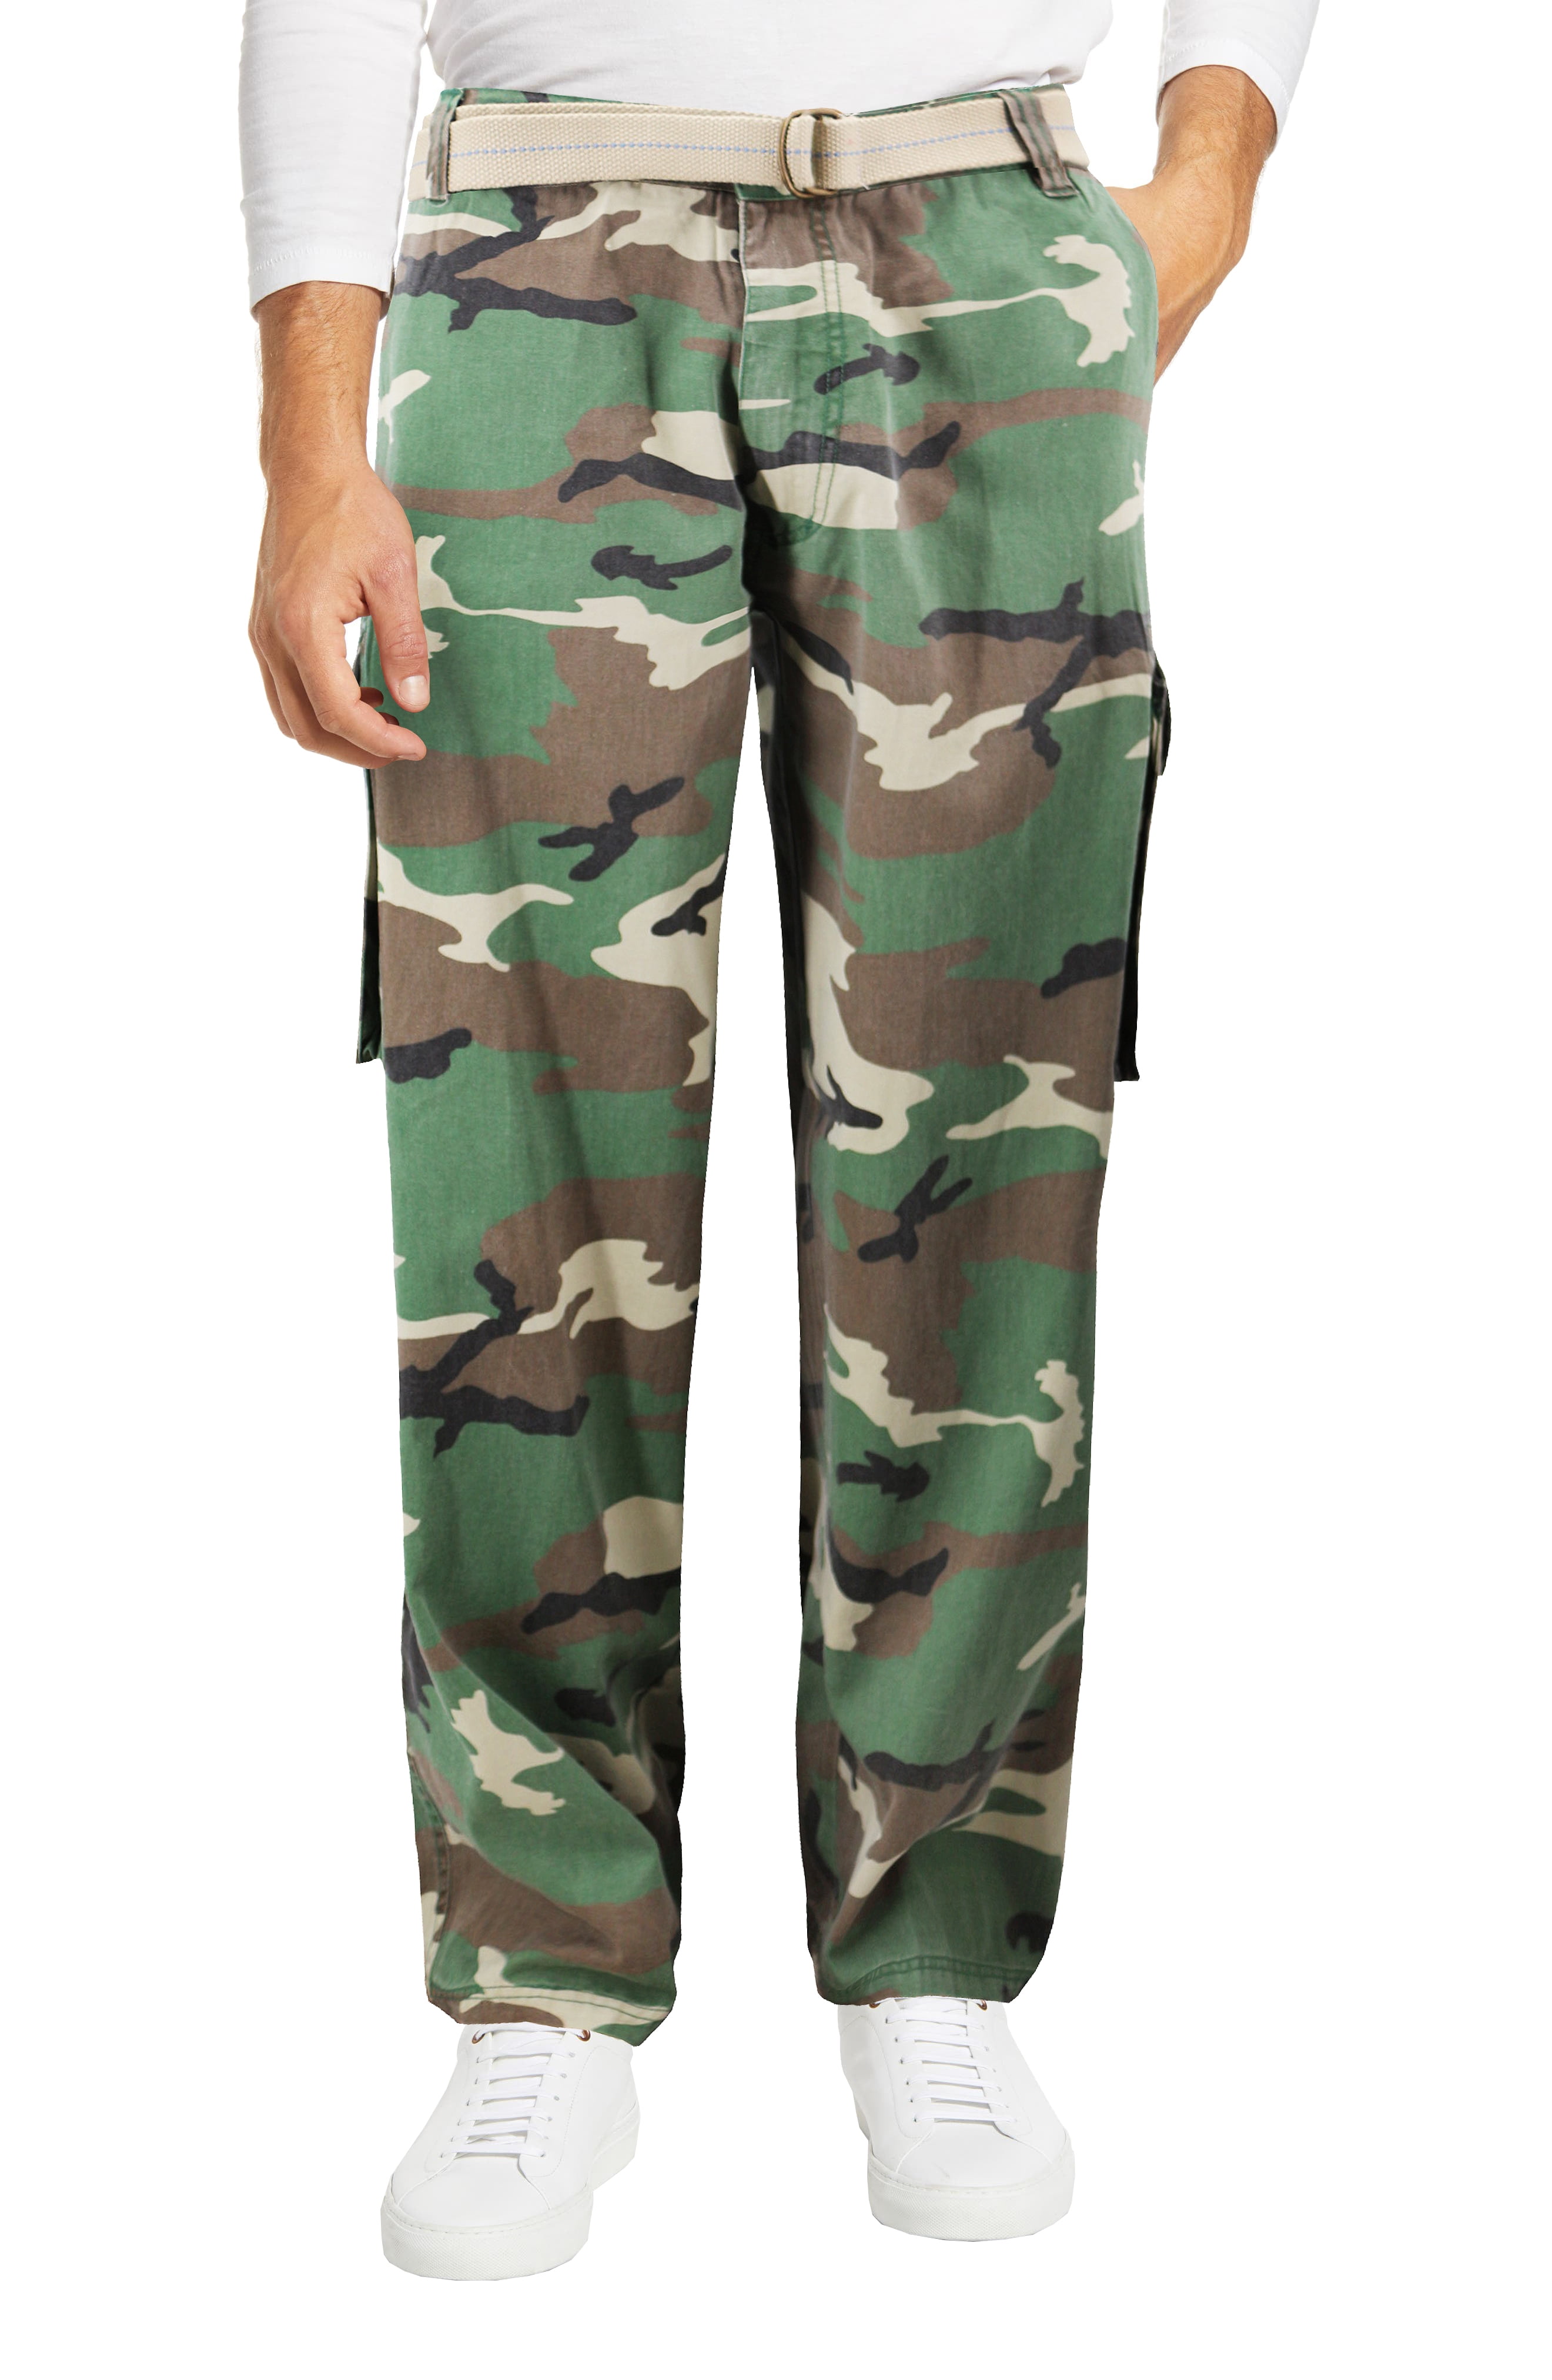 Classic Men Casual Army Cargo Loose Pants Trousers Camo Combat Work Pants 